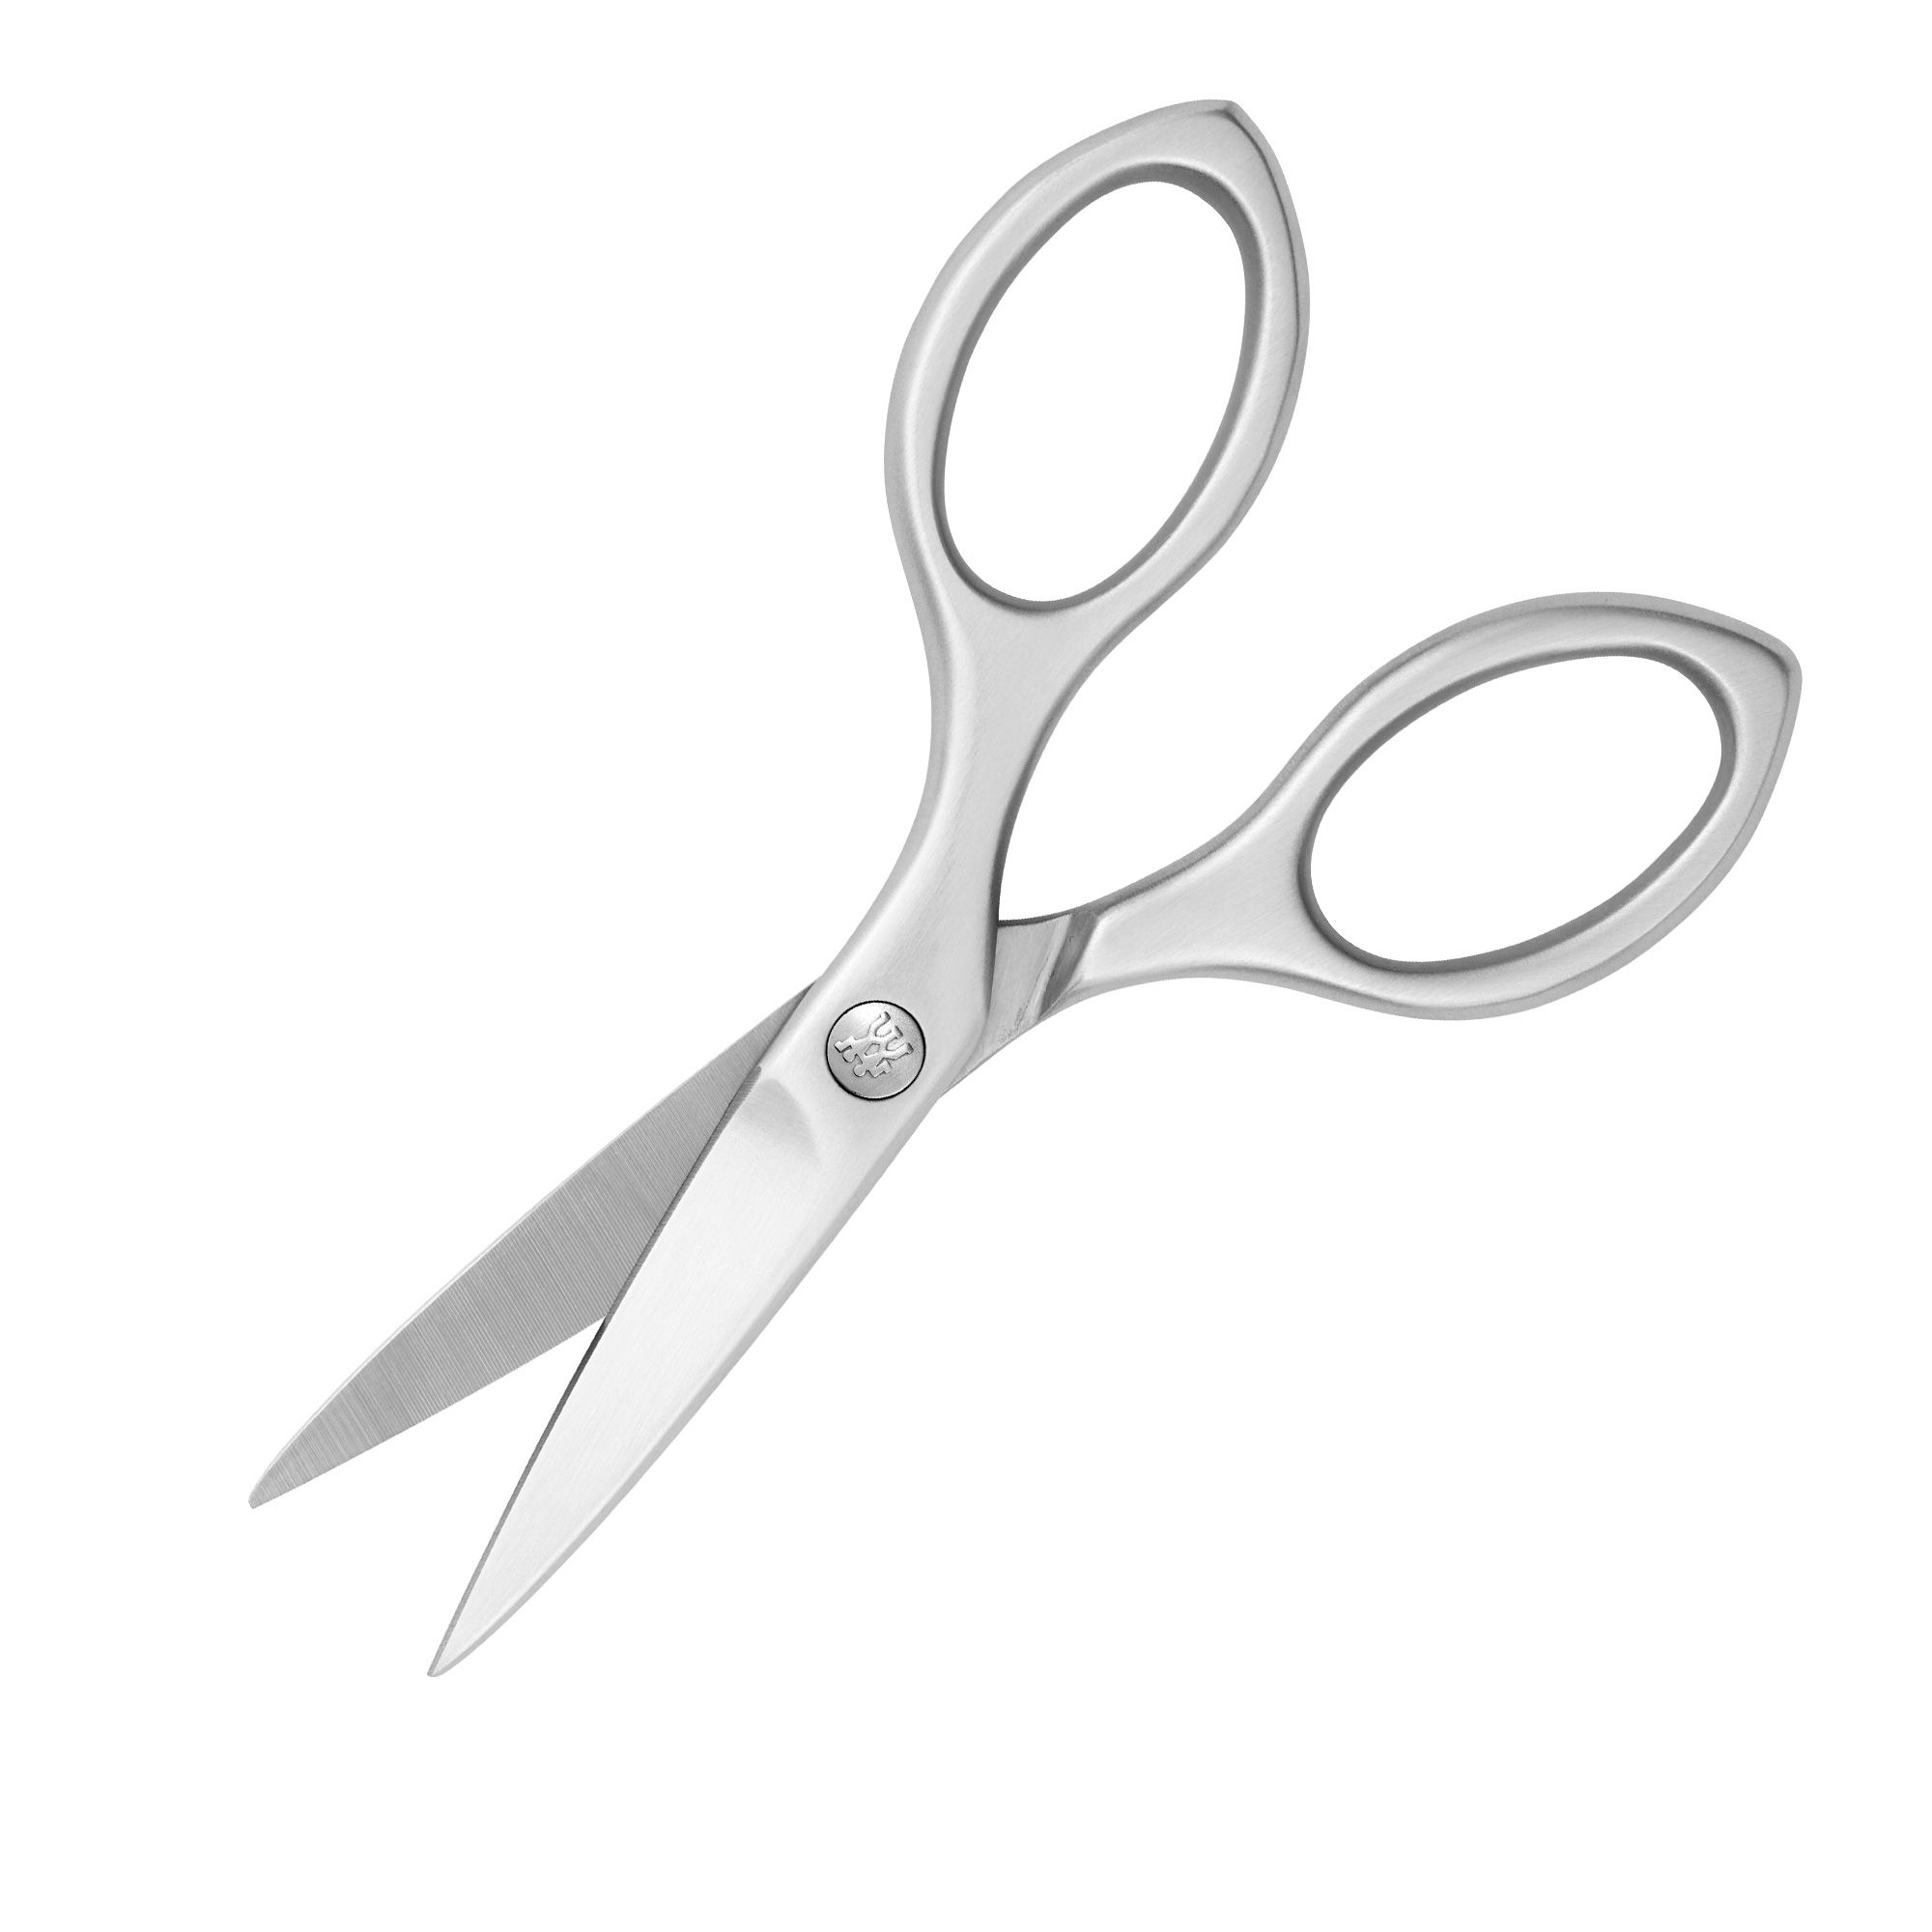 Zwilling - TWIN SELECT - household scissors 13 cm, stainless steel